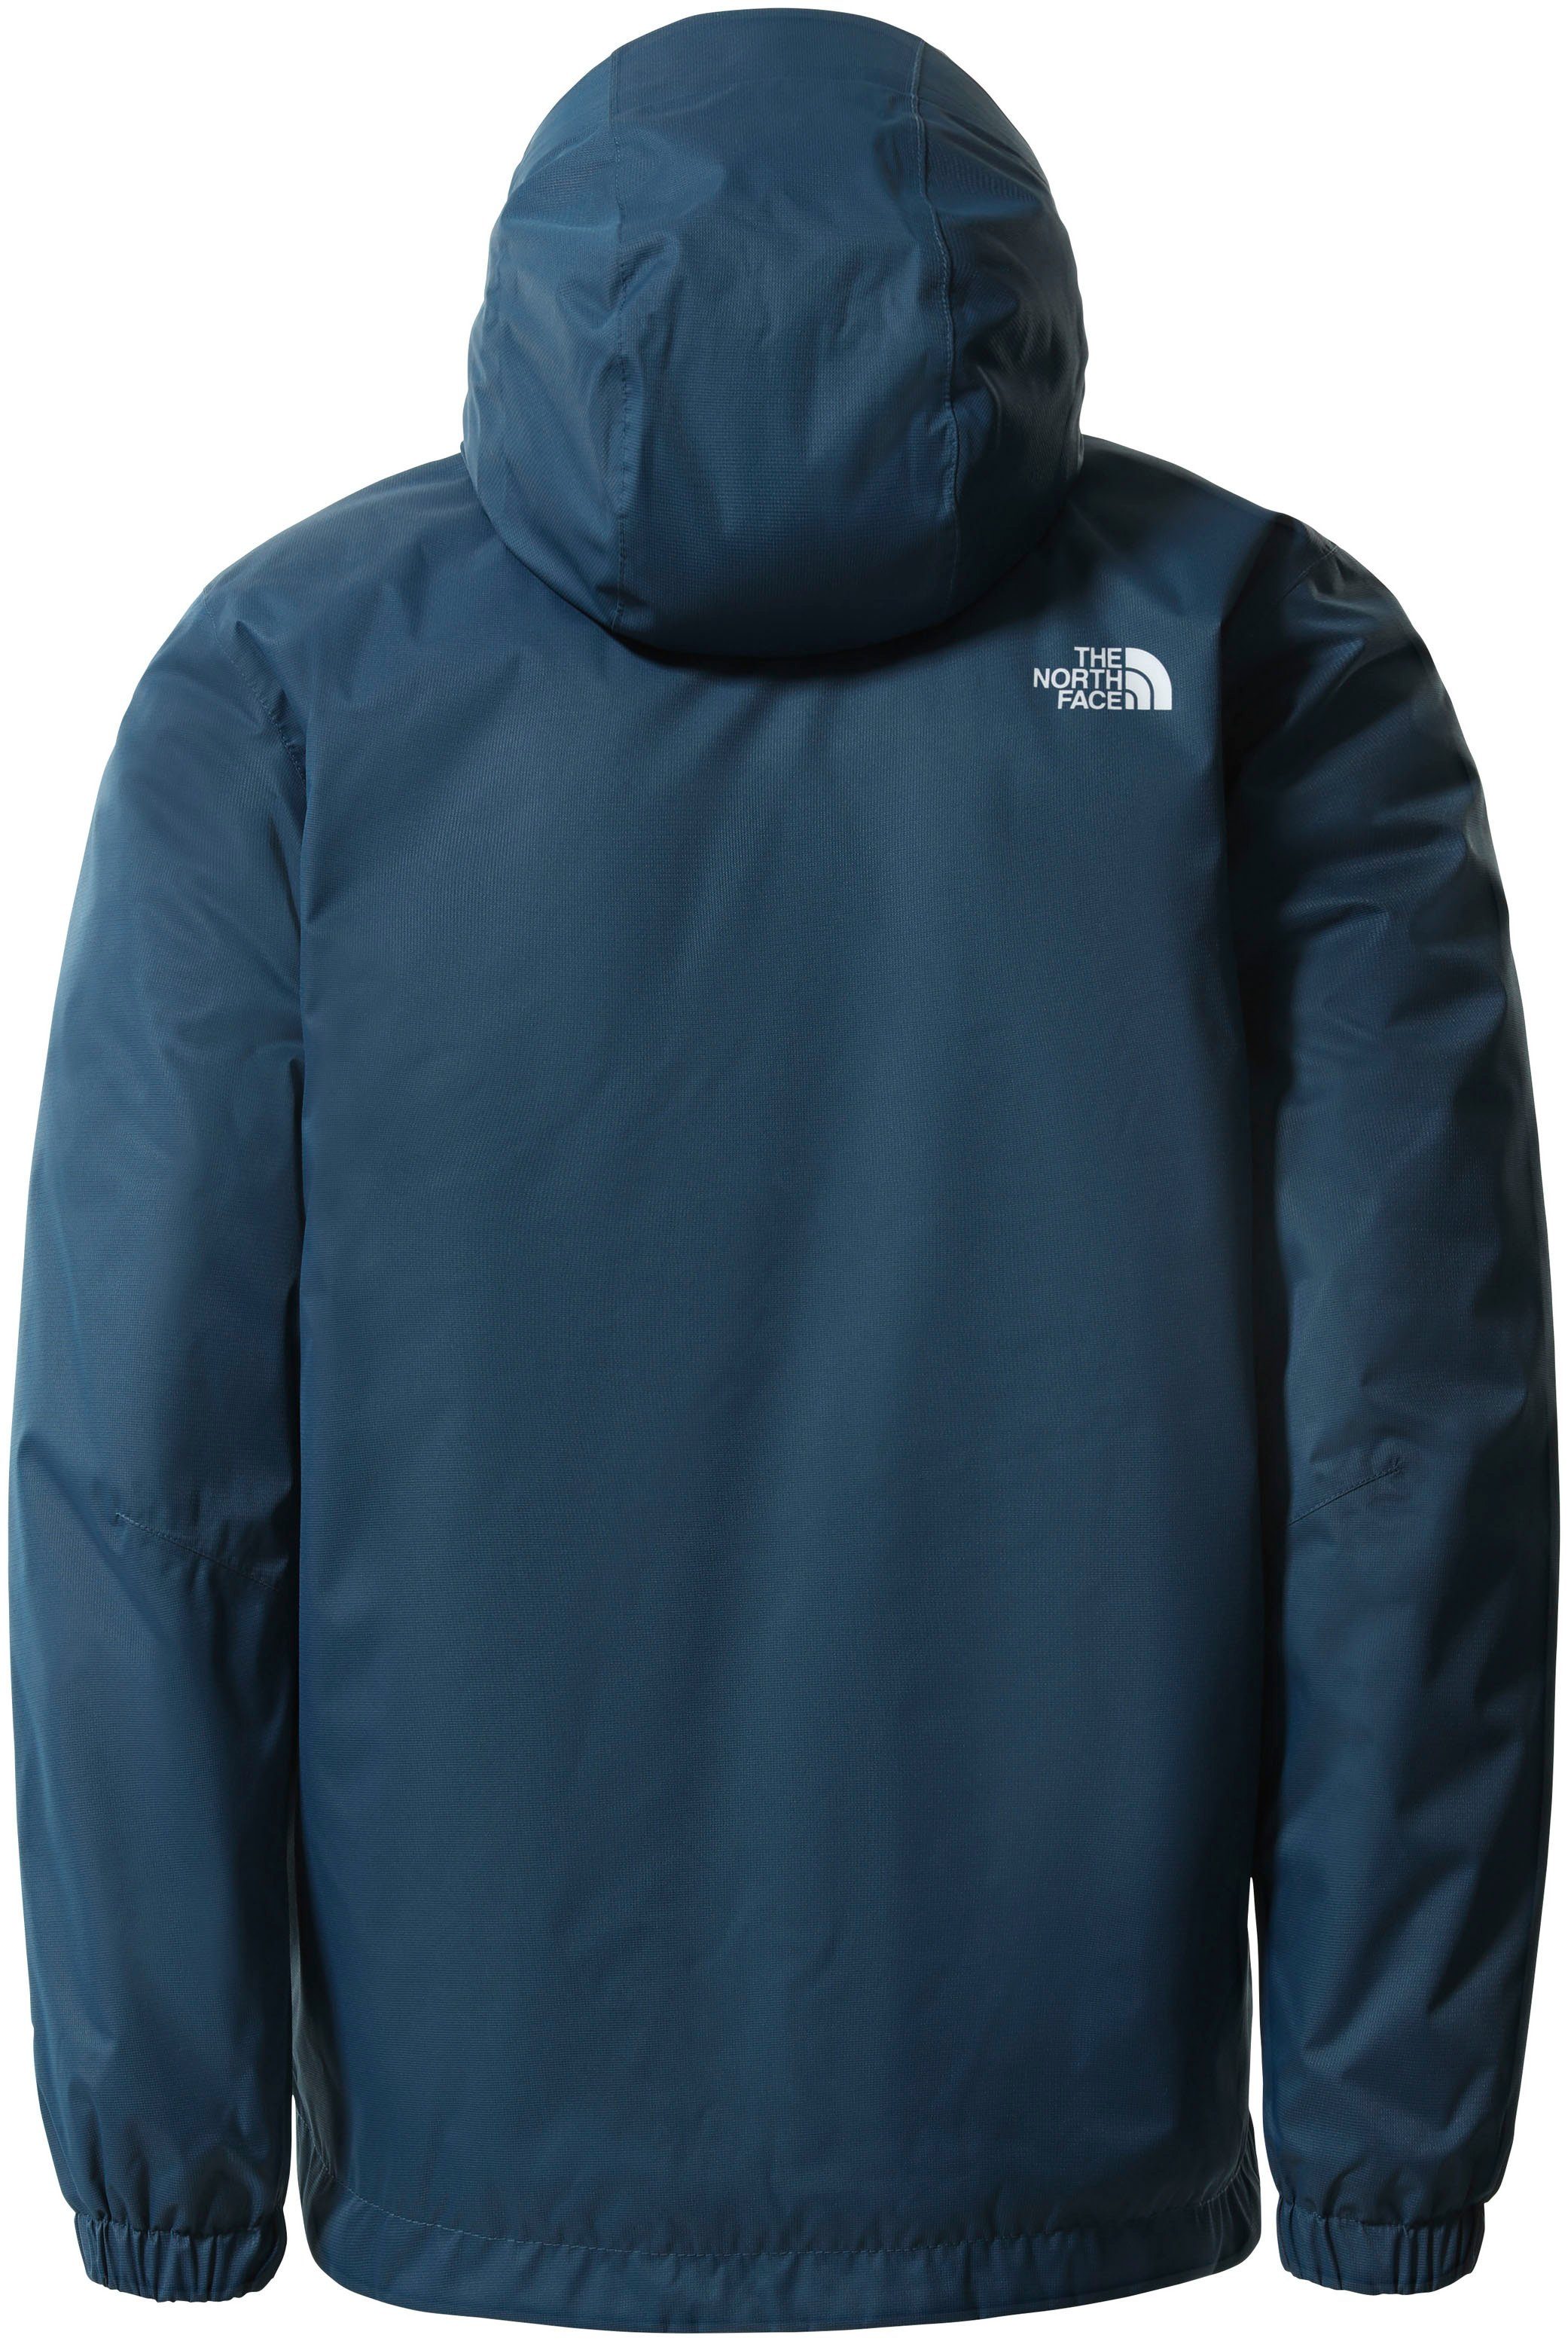 The North Face Funktionsjacke »QUEST INSULATED« | OTTO